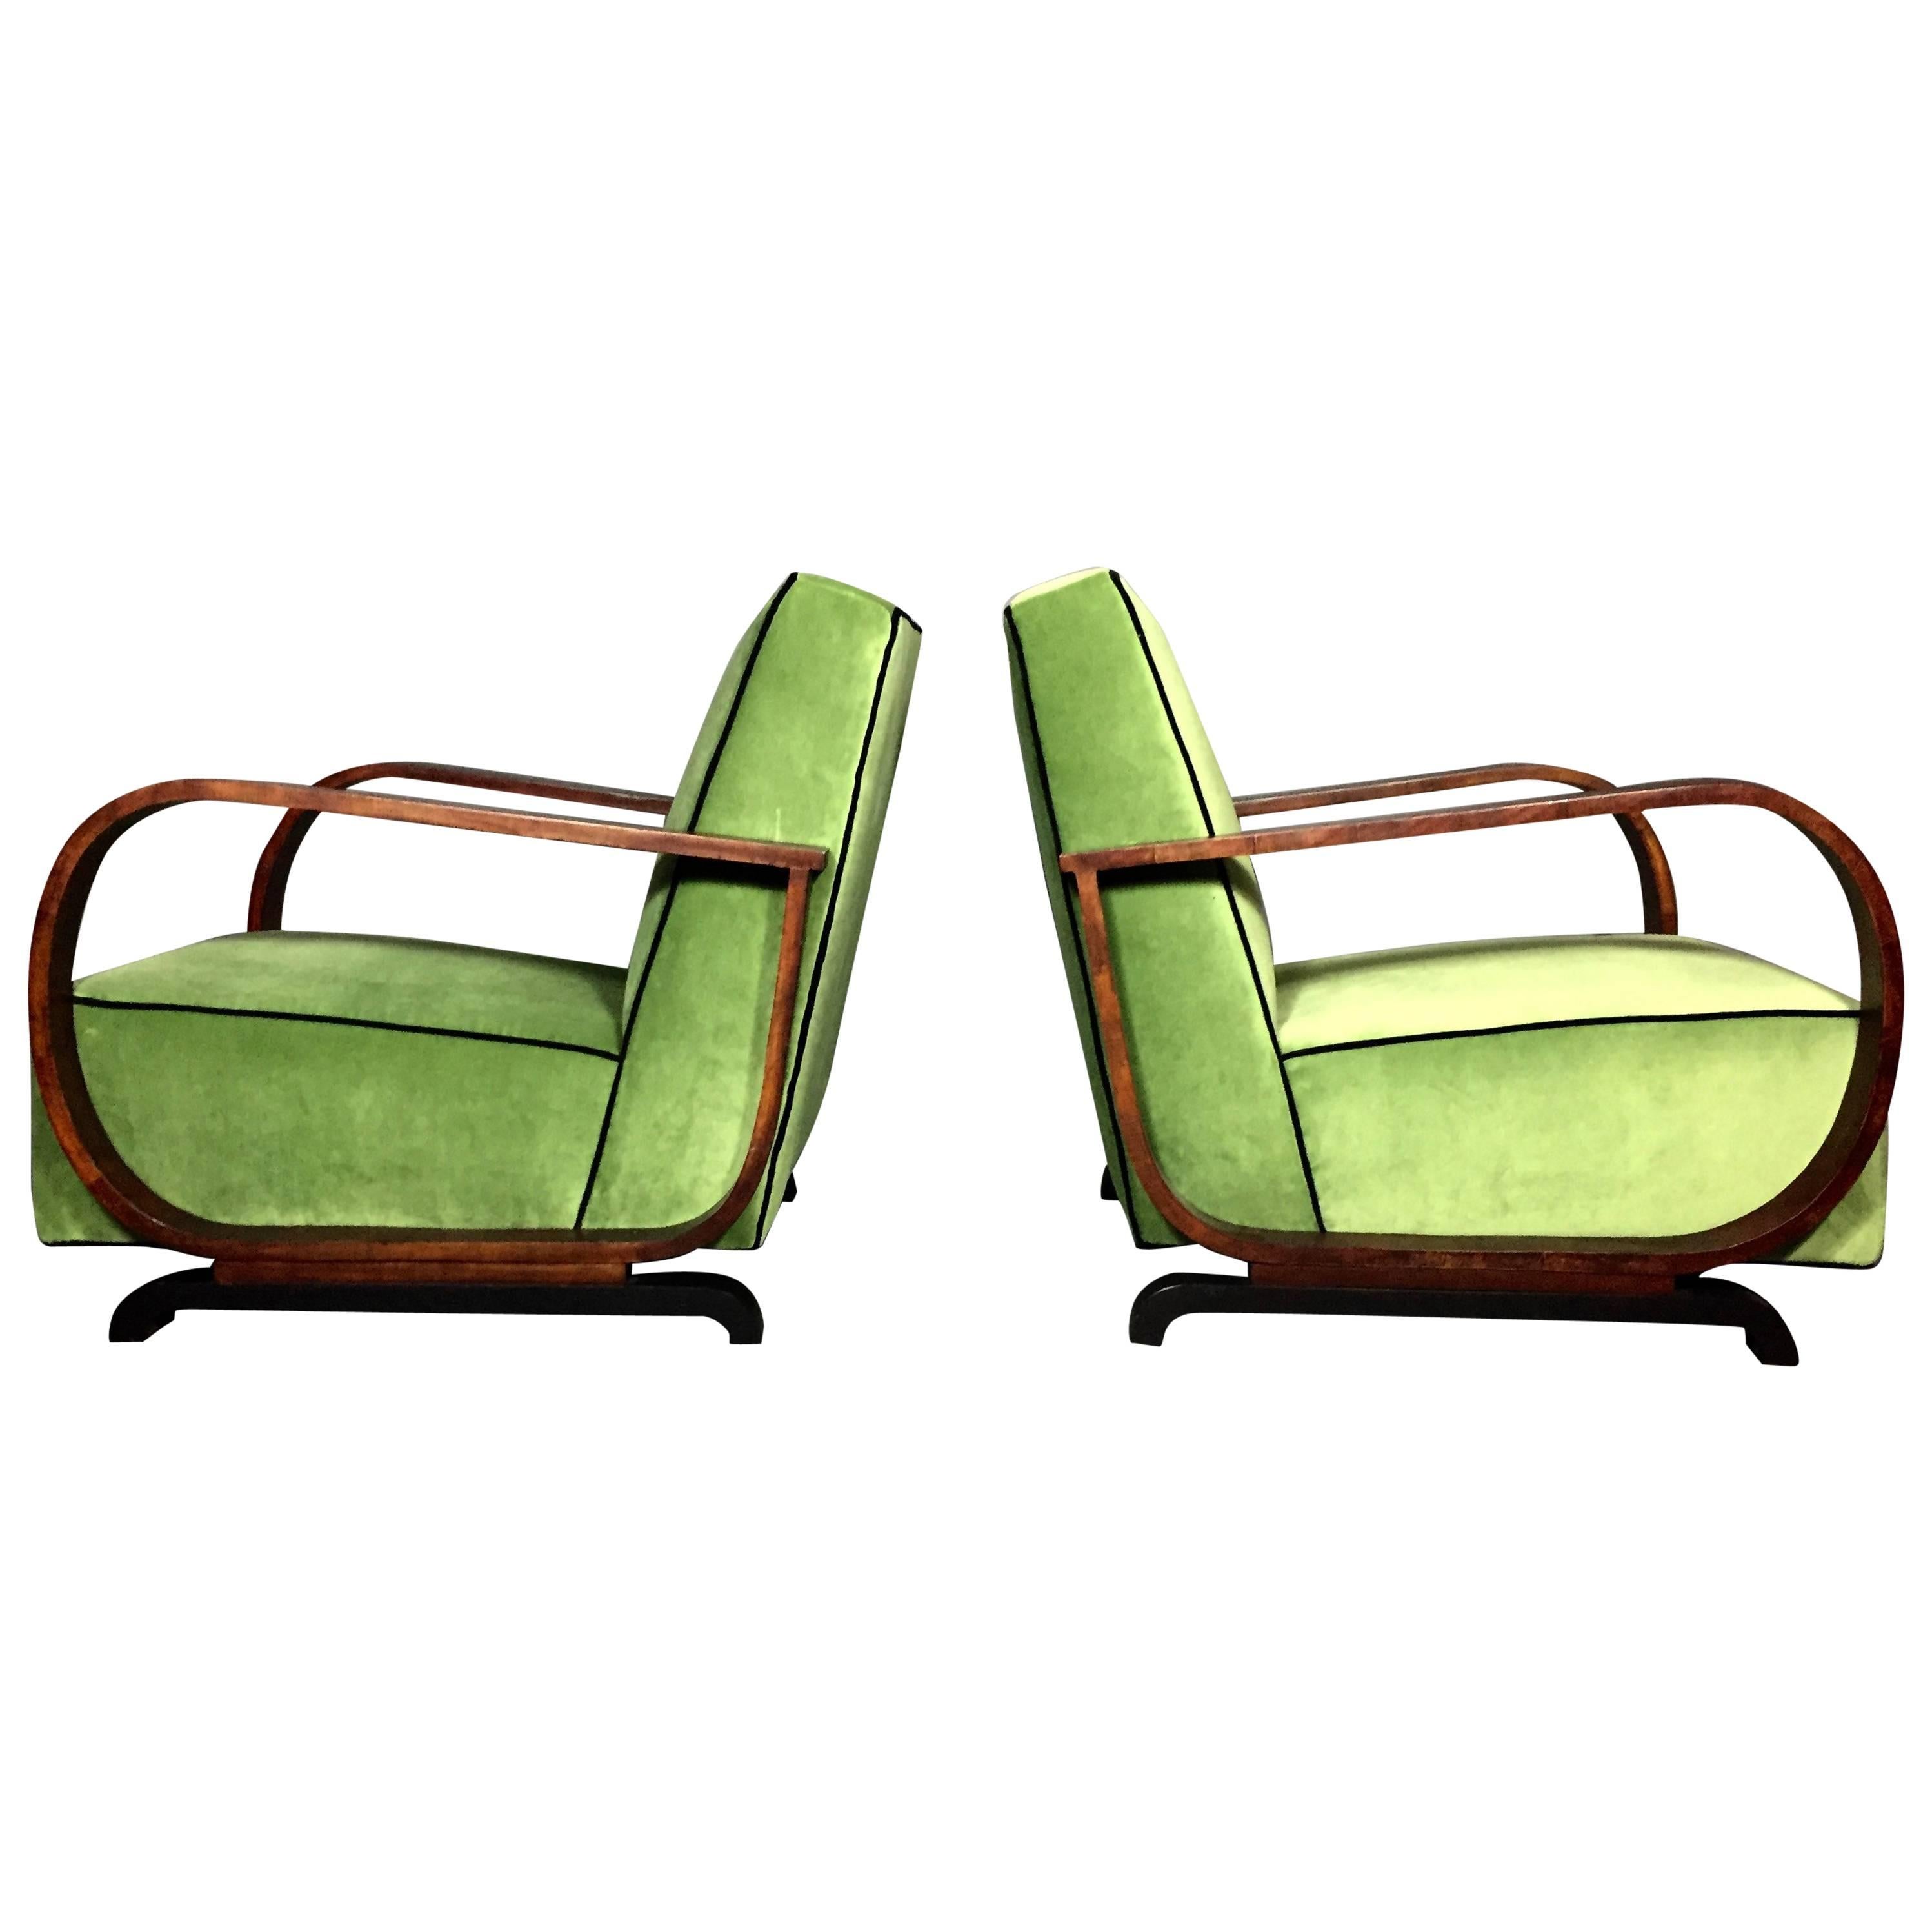 Pair of Art Deco Lounge Chairs in Walnut and Velvet, Late 1930s